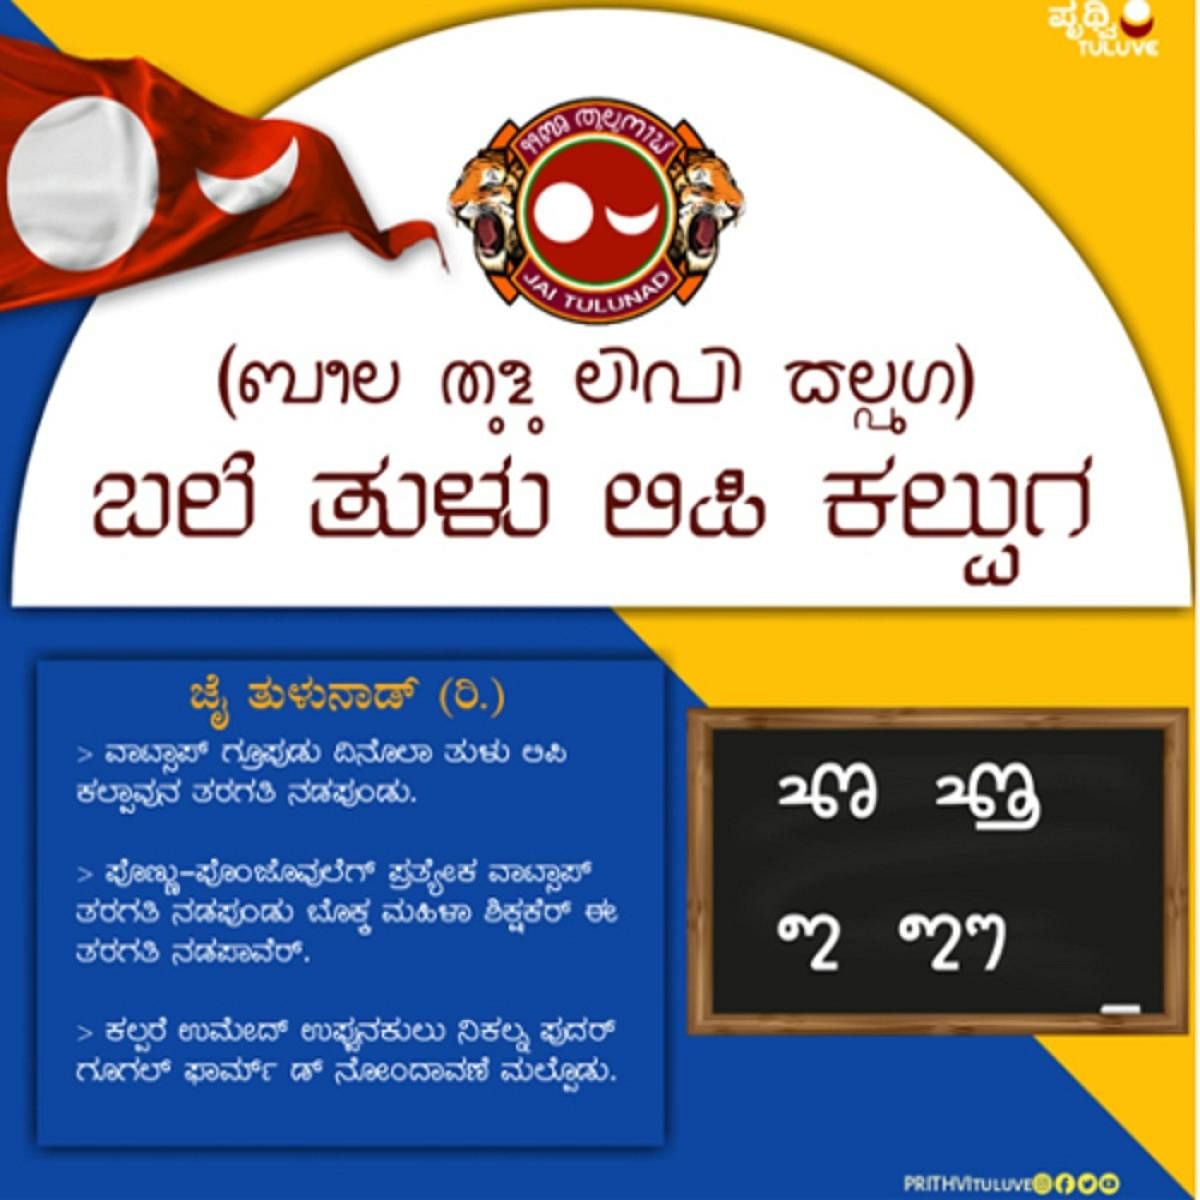 The publicity material for Tulu script learning.